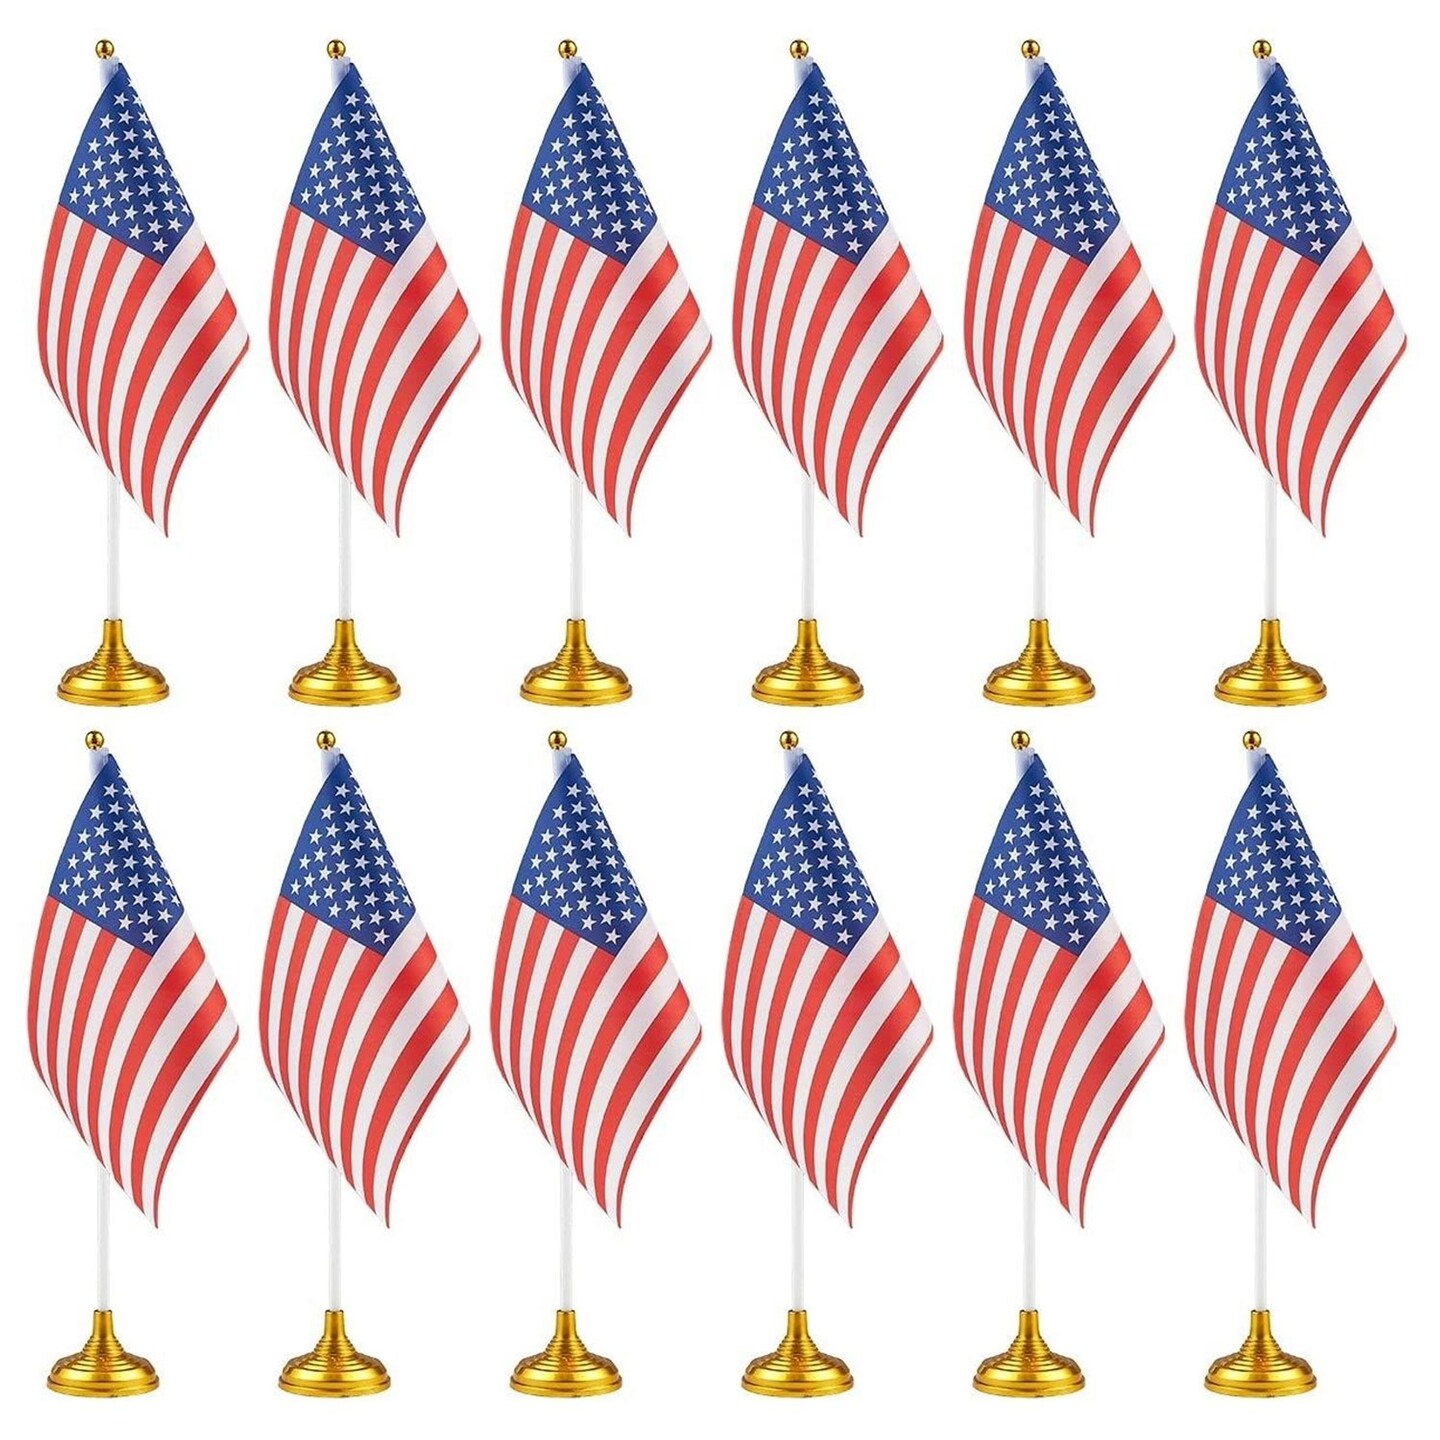 12 Pack Mini American Flags with Stands for Desks, Veterans, 4th of July, Memorial Day Centerpieces for Patriotic Table Decorations (12 Inches)